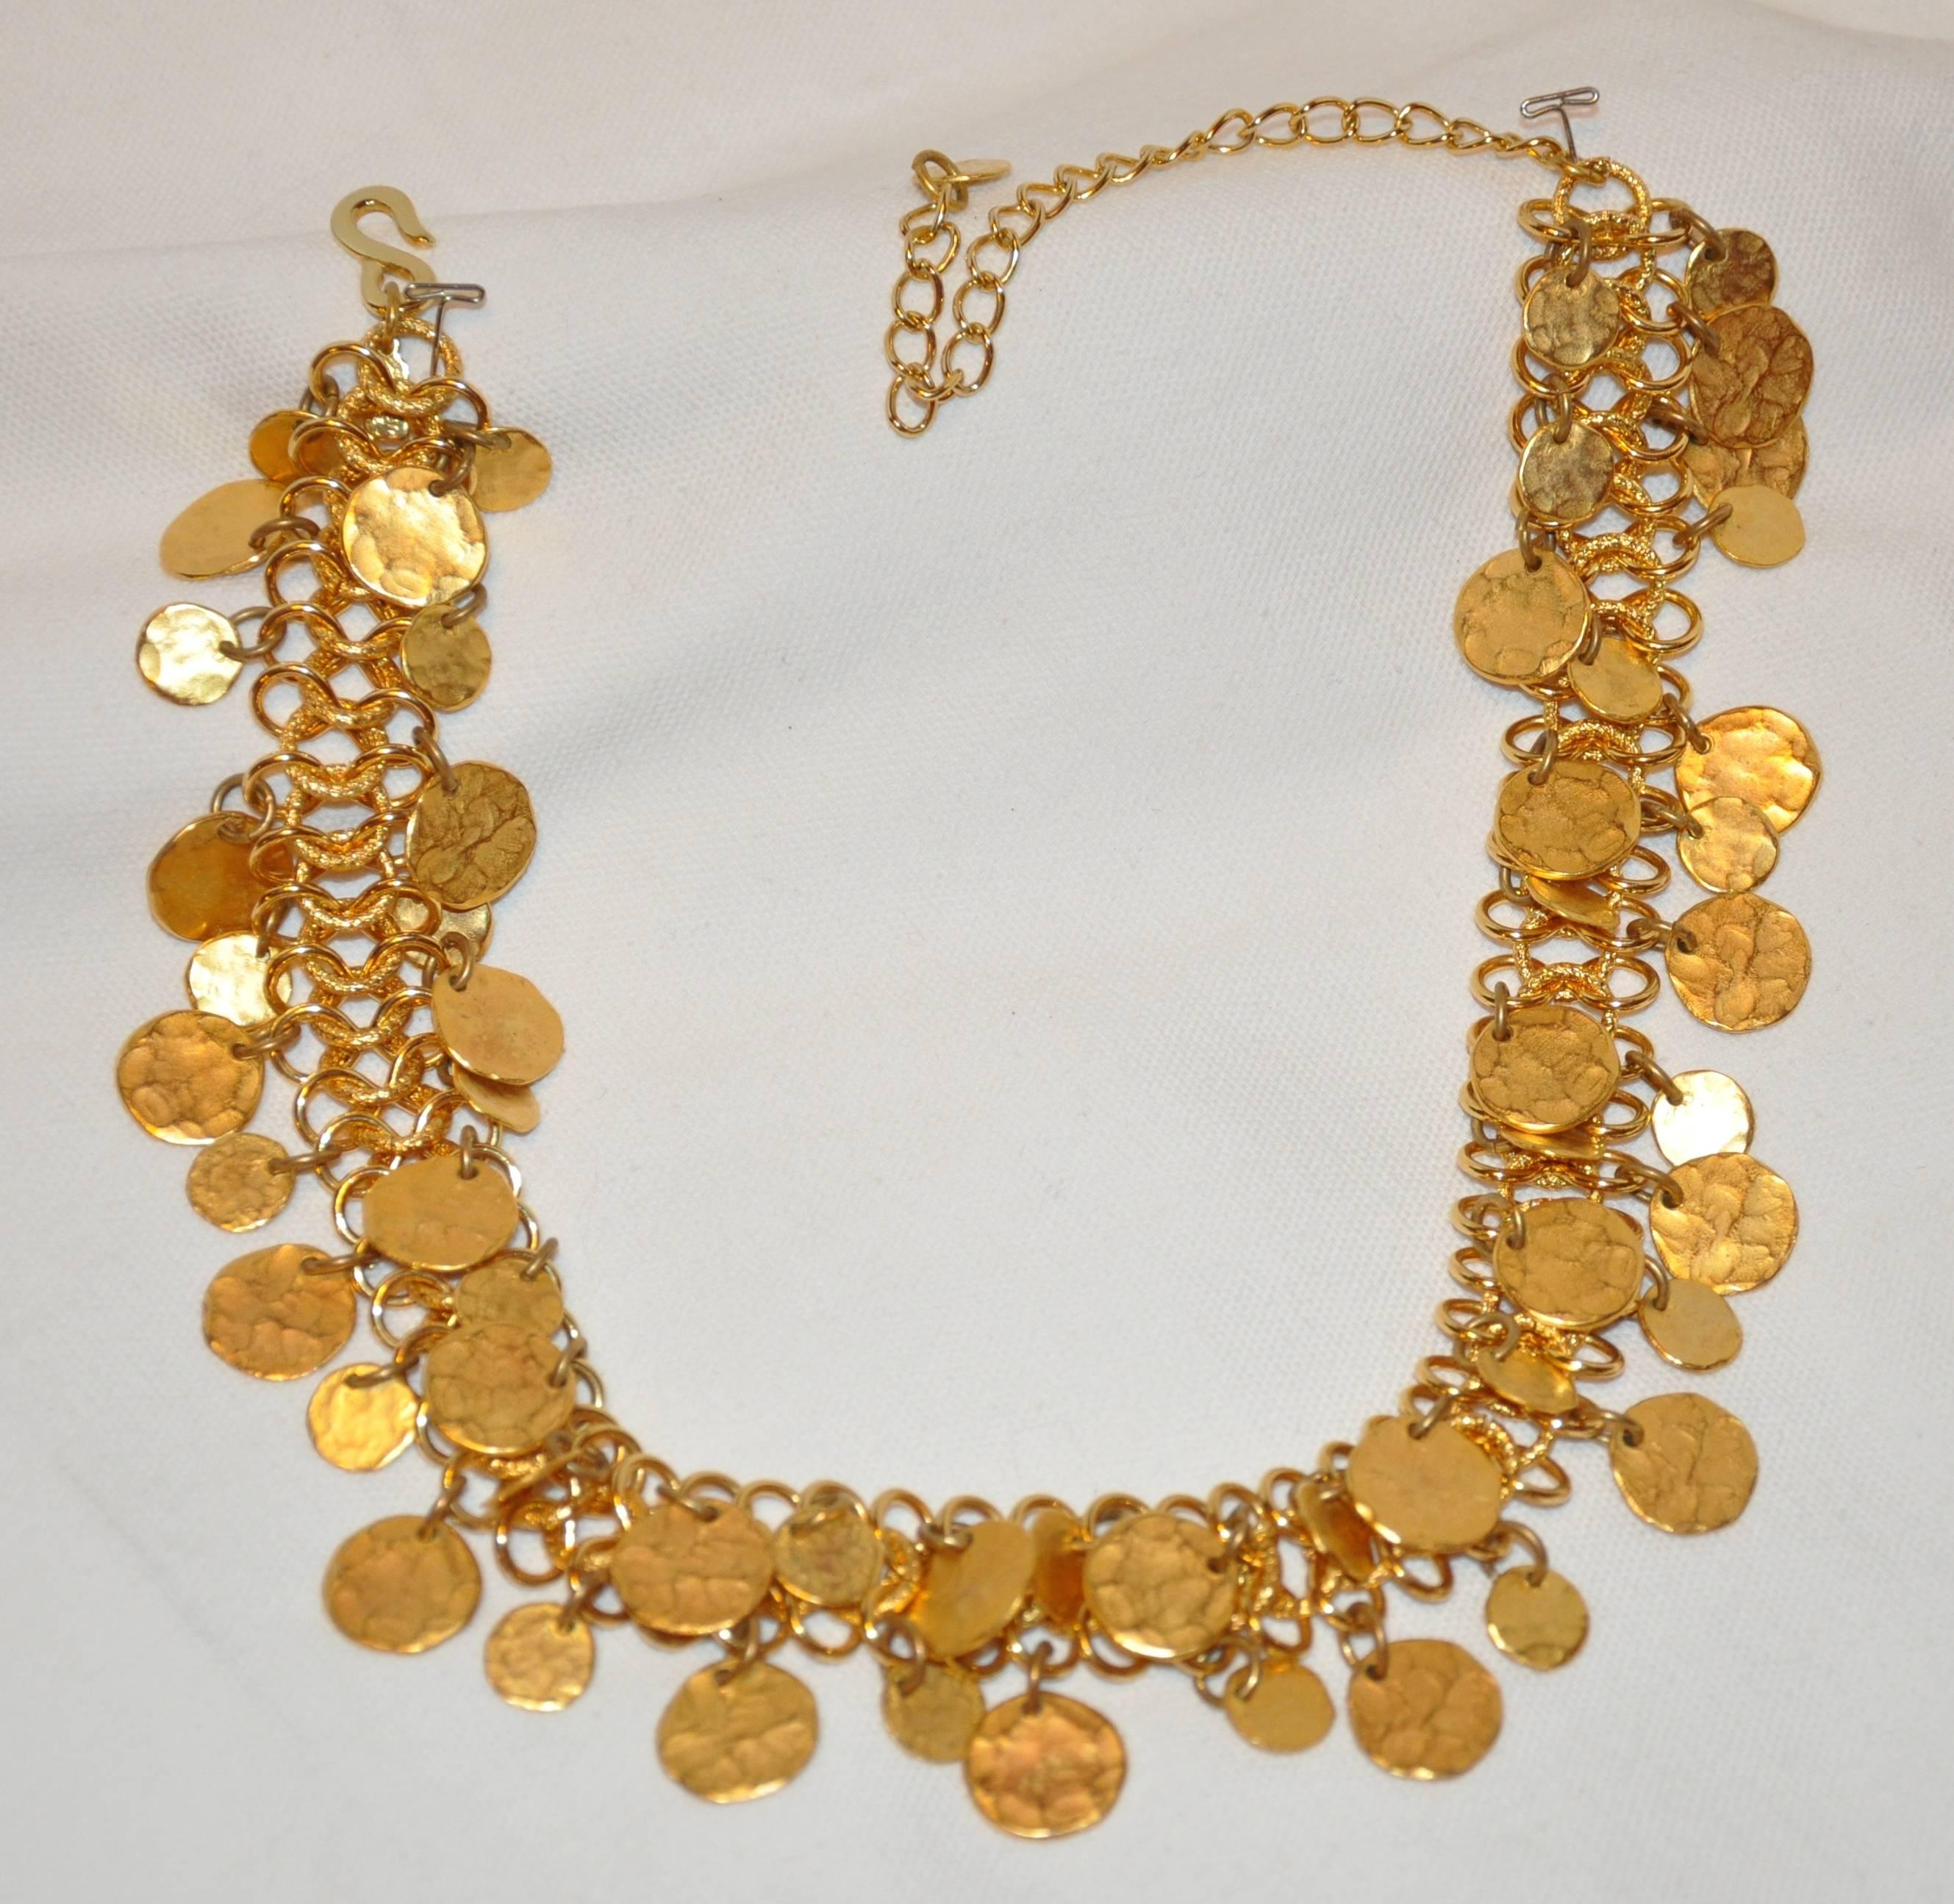         Kenneth Jay Lane wonderfully whimsical hammered gilded gold hardware multi-disc chain-link adjustable necklace measures from 15" - 20" in total length depending on one would like to wear. The width measures 6/8", made in